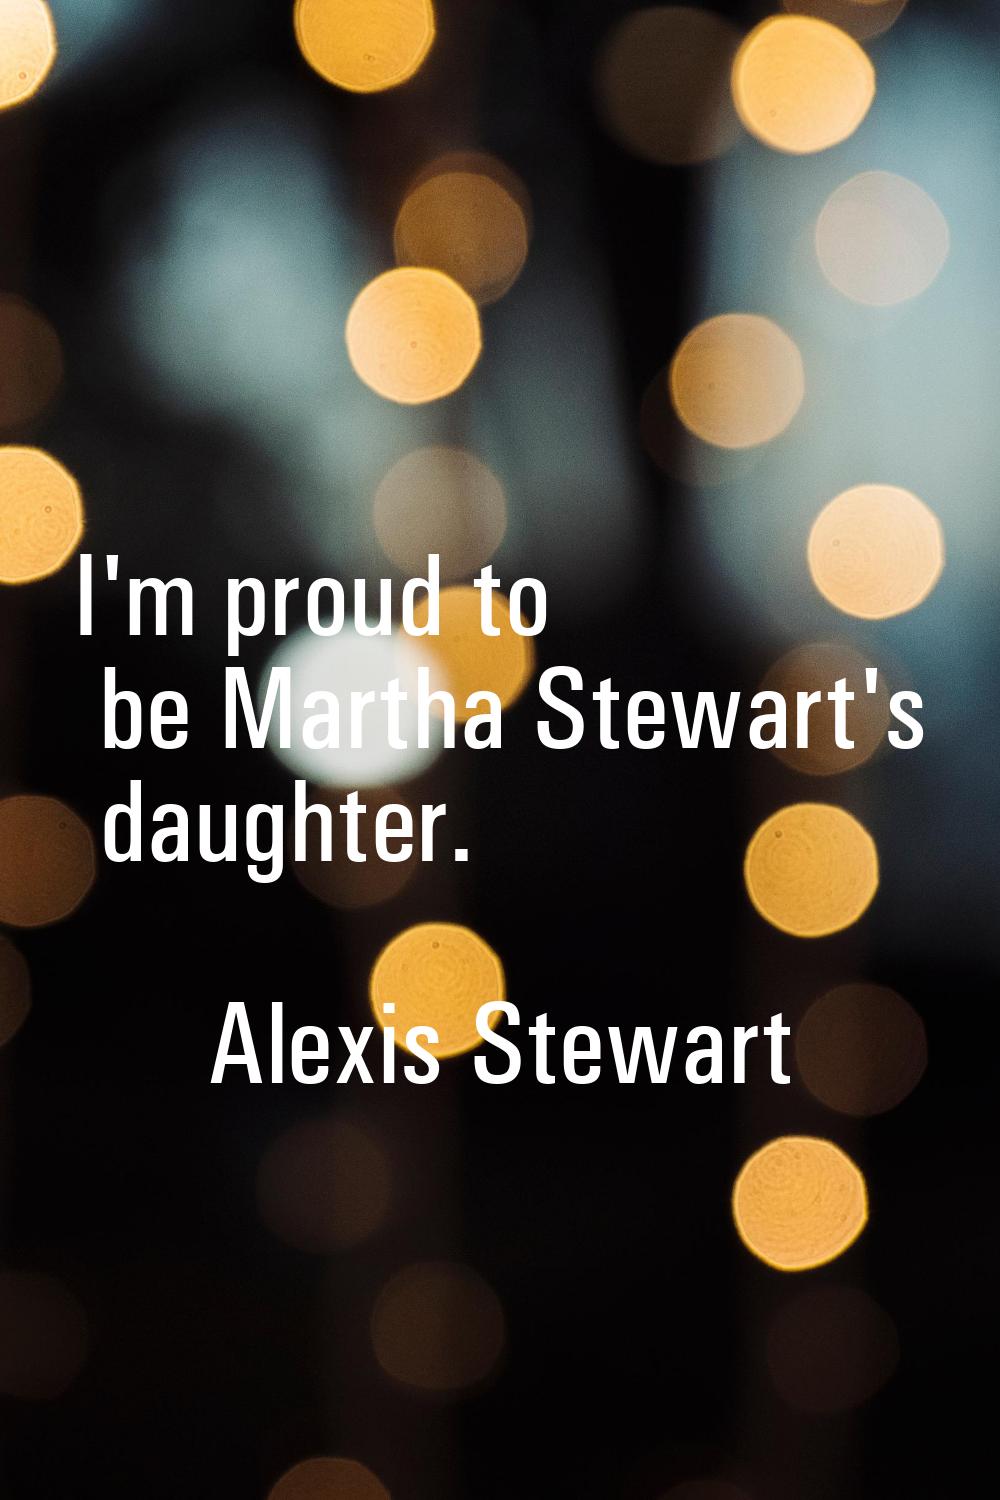 I'm proud to be Martha Stewart's daughter.